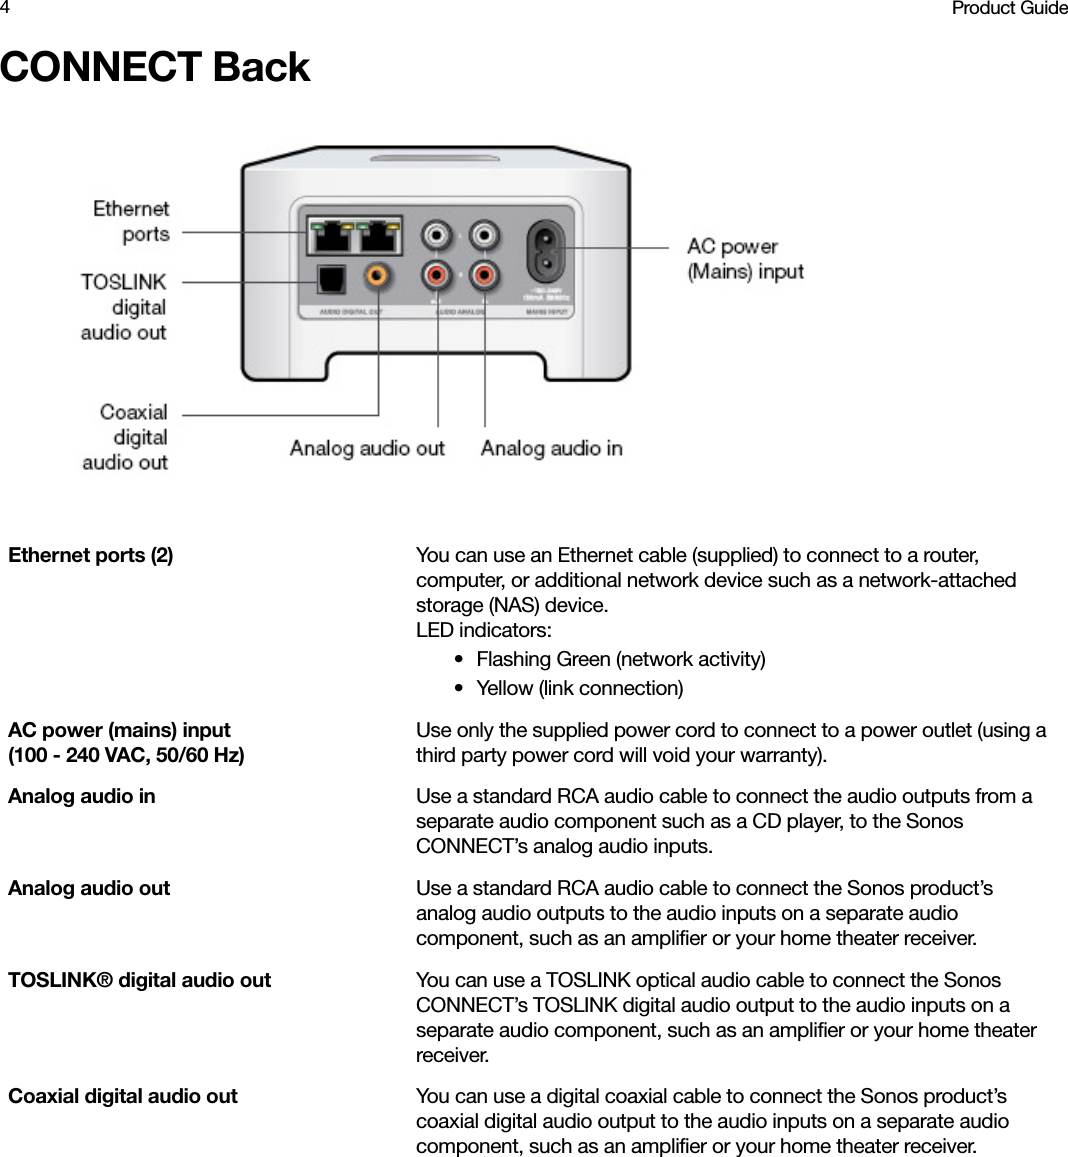 Product Guide4CONNECT BackEthernet ports (2) You can use an Ethernet cable (supplied) to connect to a router, computer, or additional network device such as a network-attached storage (NAS) device.LED indicators:• Flashing Green (network activity)• Yellow (link connection)AC power (mains) input  (100 - 240 VAC, 50/60 Hz)Use only the supplied power cord to connect to a power outlet (using a third party power cord will void your warranty).Analog audio in Use a standard RCA audio cable to connect the audio outputs from a separate audio component such as a CD player, to the Sonos CONNECT’s analog audio inputs. Analog audio out  Use a standard RCA audio cable to connect the Sonos product’s analog audio outputs to the audio inputs on a separate audio component, such as an amplifier or your home theater receiver. TOSLINK® digital audio out You can use a TOSLINK optical audio cable to connect the Sonos CONNECT’s TOSLINK digital audio output to the audio inputs on a separate audio component, such as an amplifier or your home theater receiver. Coaxial digital audio out You can use a digital coaxial cable to connect the Sonos product’s coaxial digital audio output to the audio inputs on a separate audio component, such as an amplifier or your home theater receiver. 